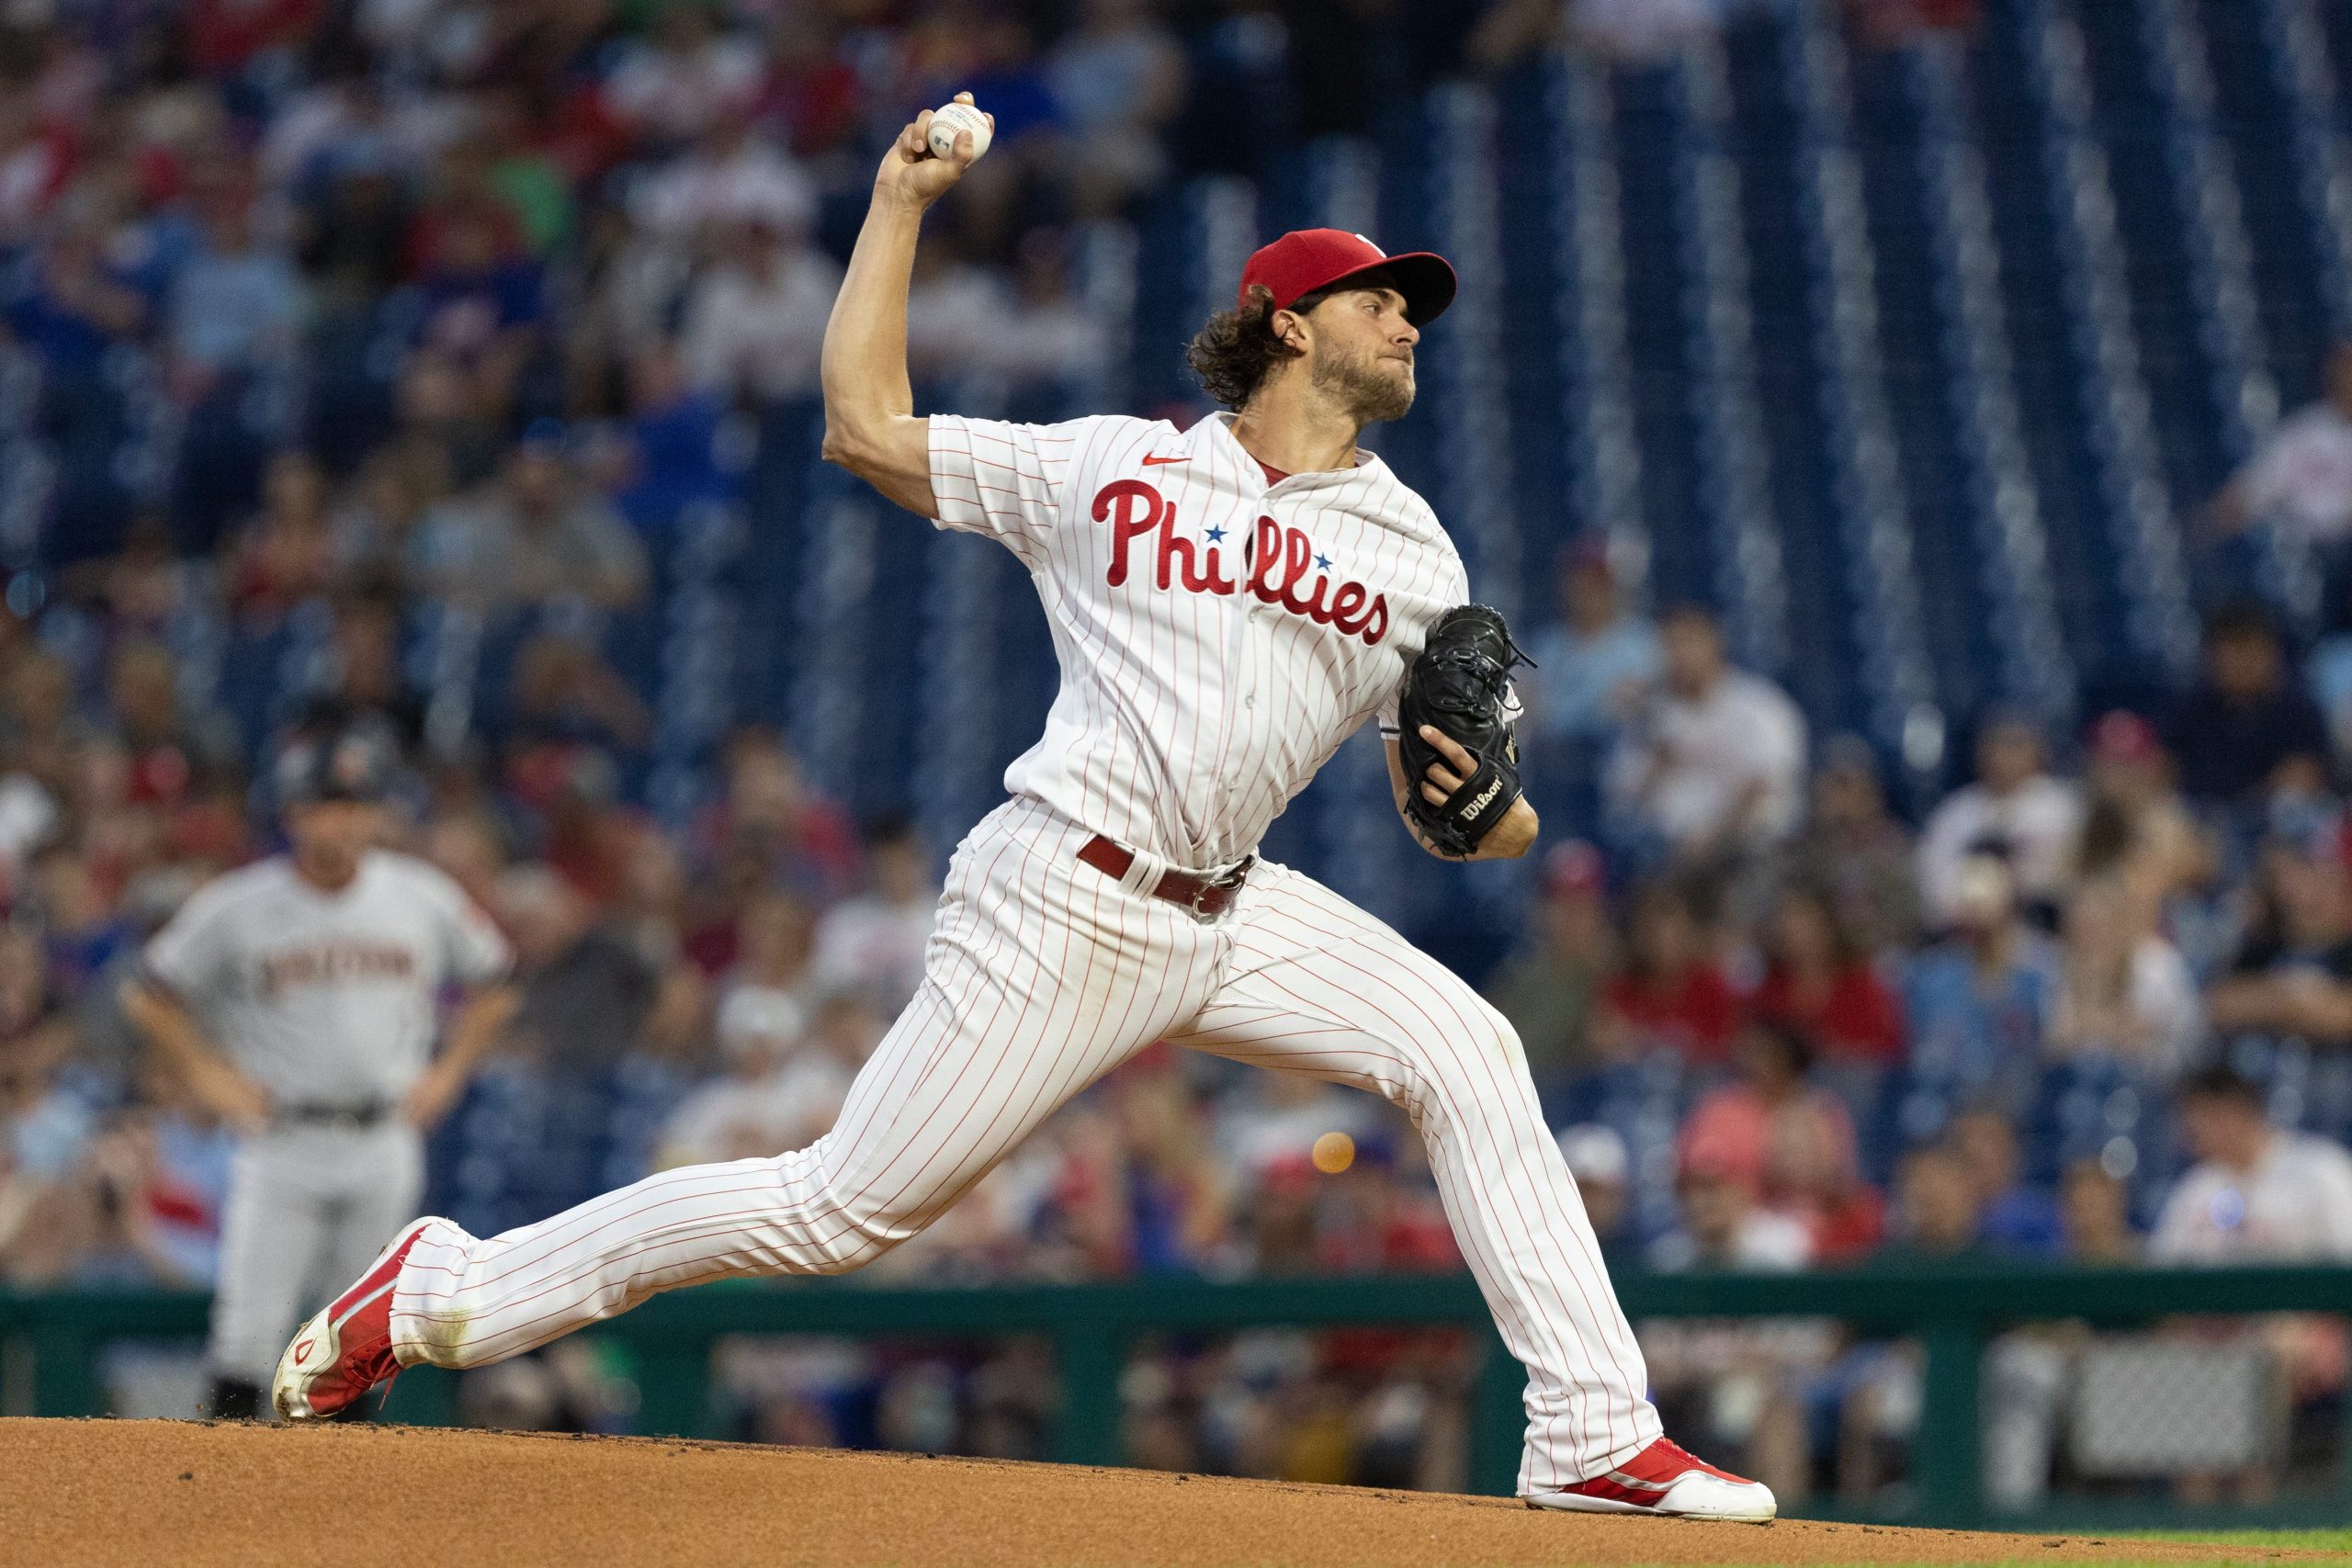 Philadelphia Phillies starting pitcher Aaron Nola (27) throws a pitch against the Arizona Diamondbacks during the first inning at Citizens Bank Park.